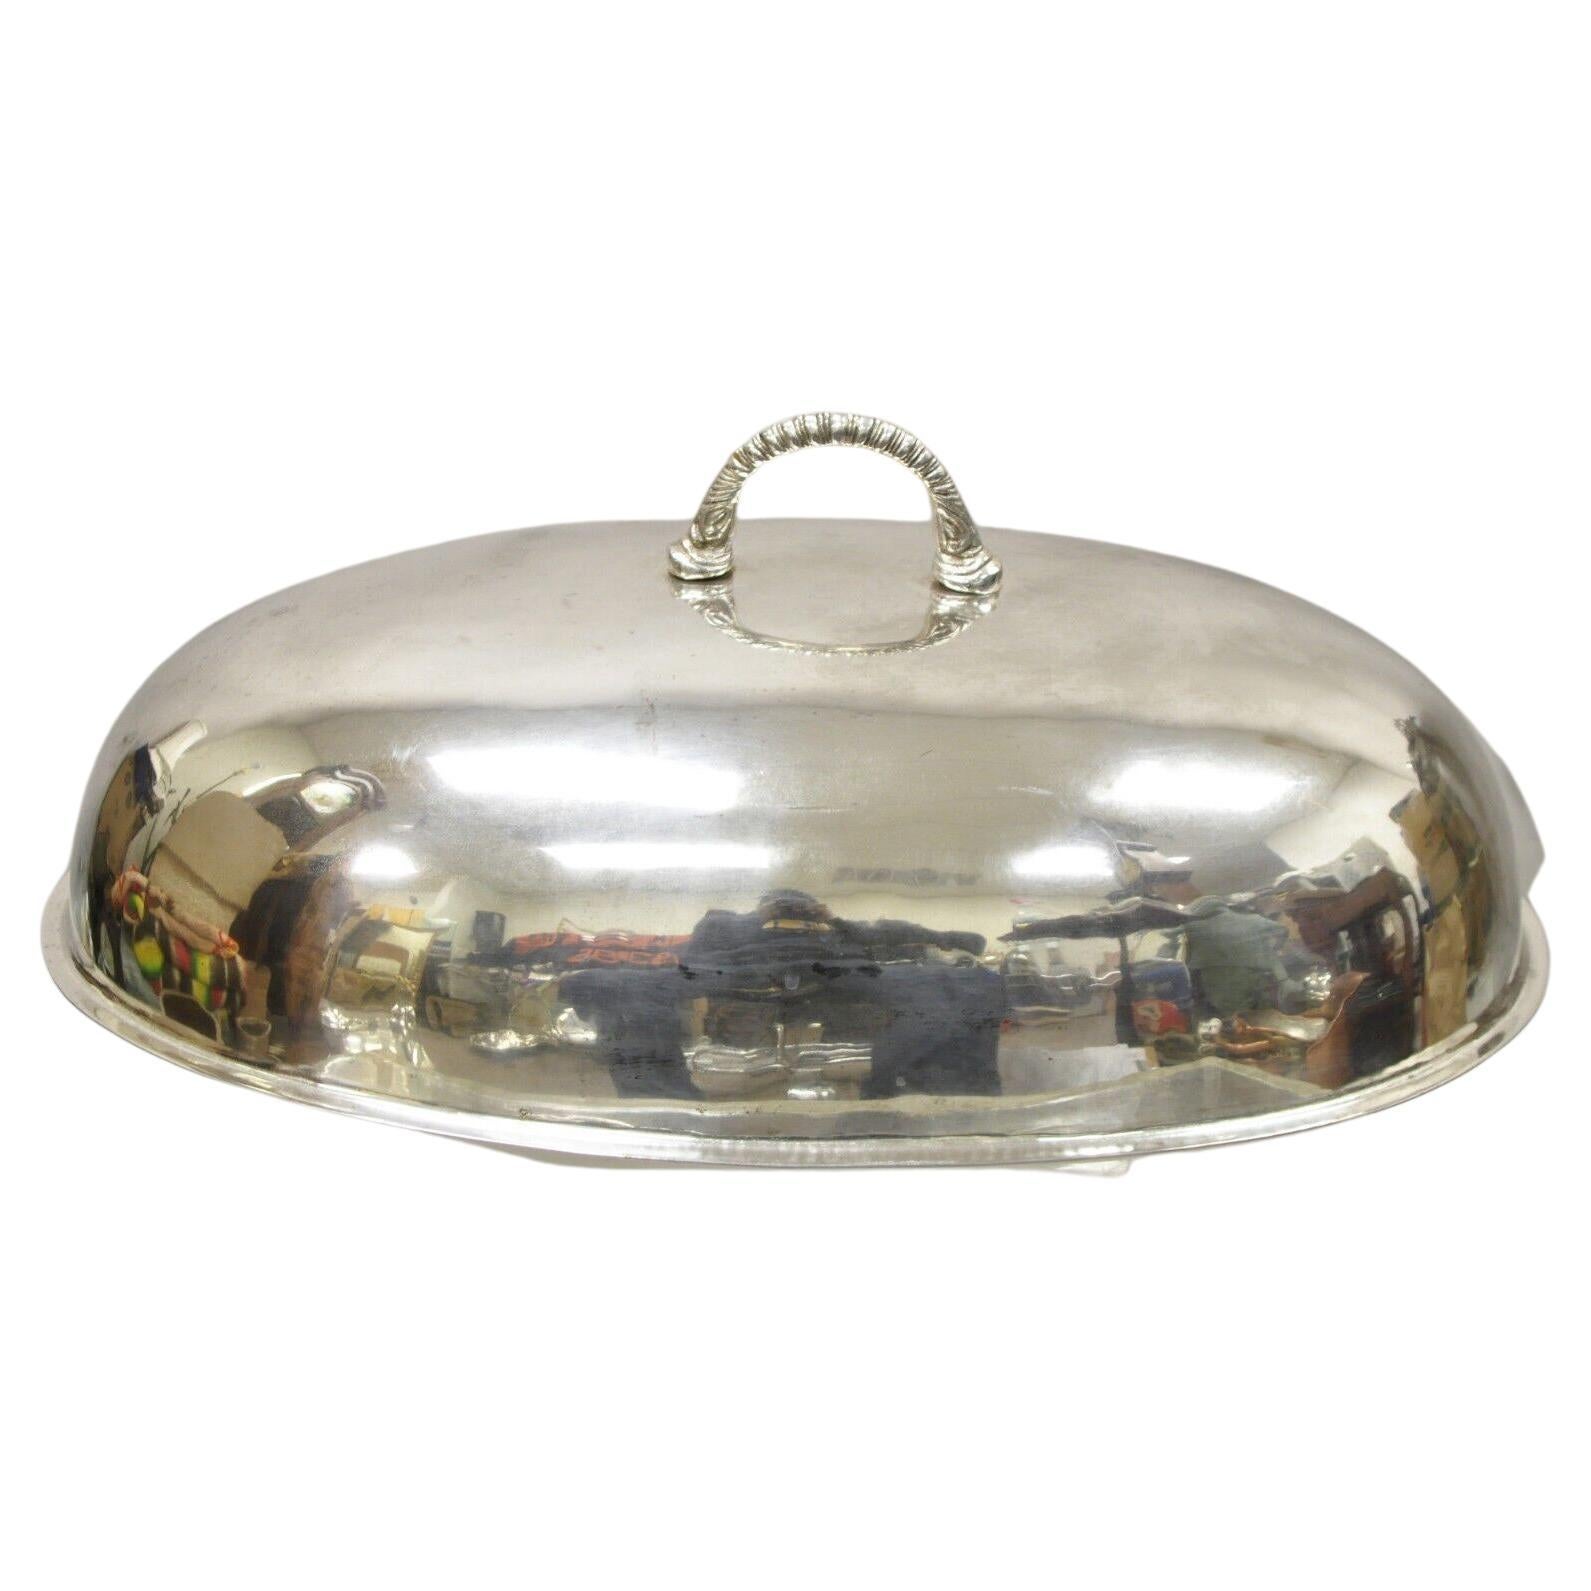 Large Vintage Oval Modern Silver Plated Food Serving Dish Dome Cover